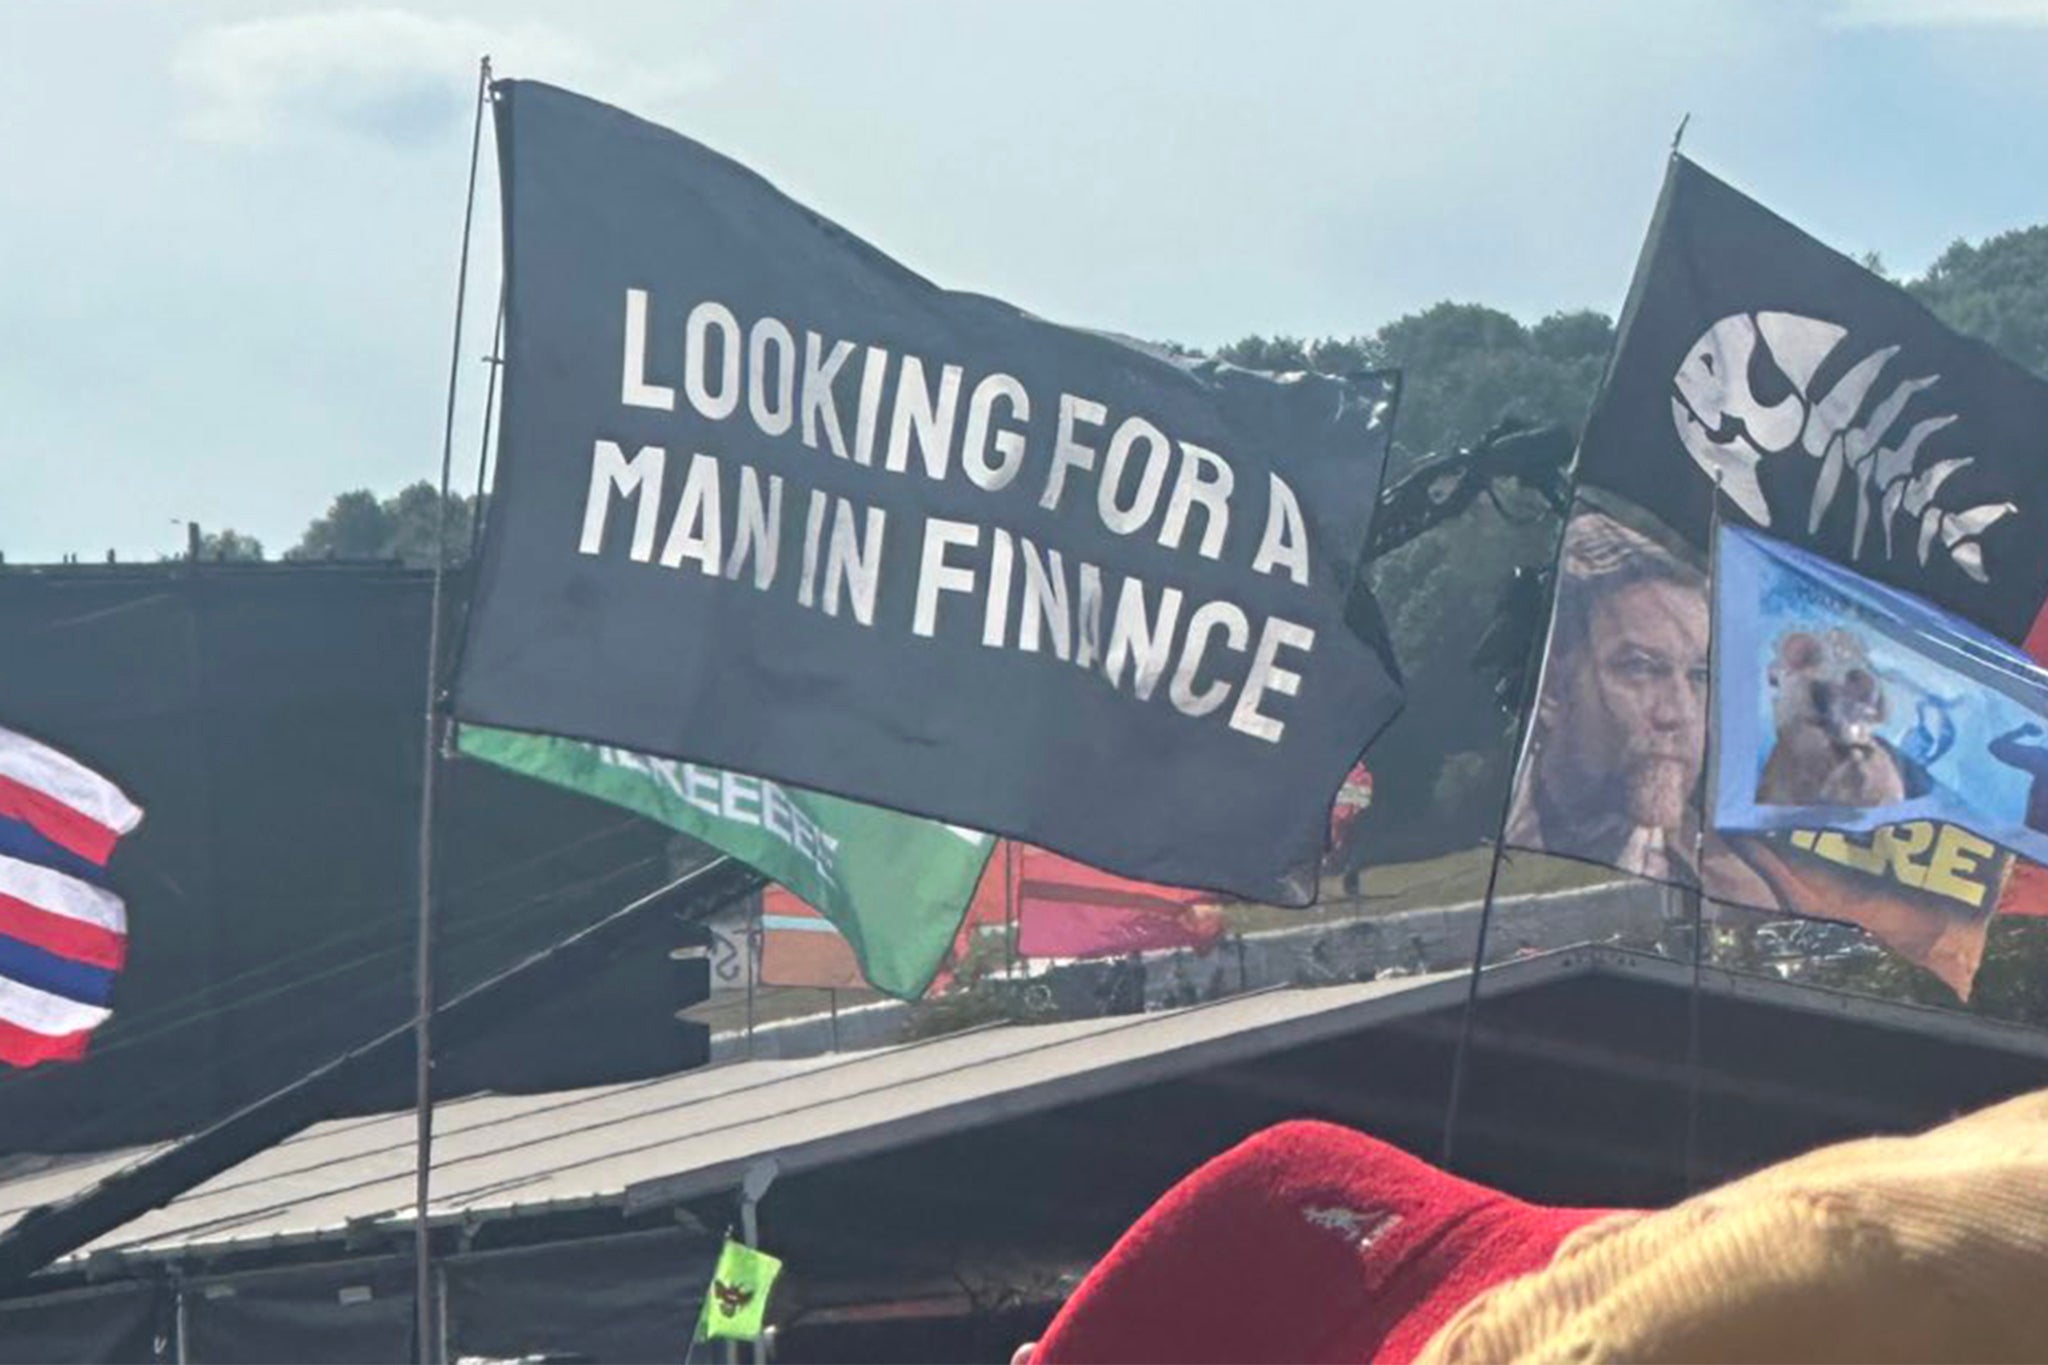 One of the many ‘man in finance’ flags at the festival